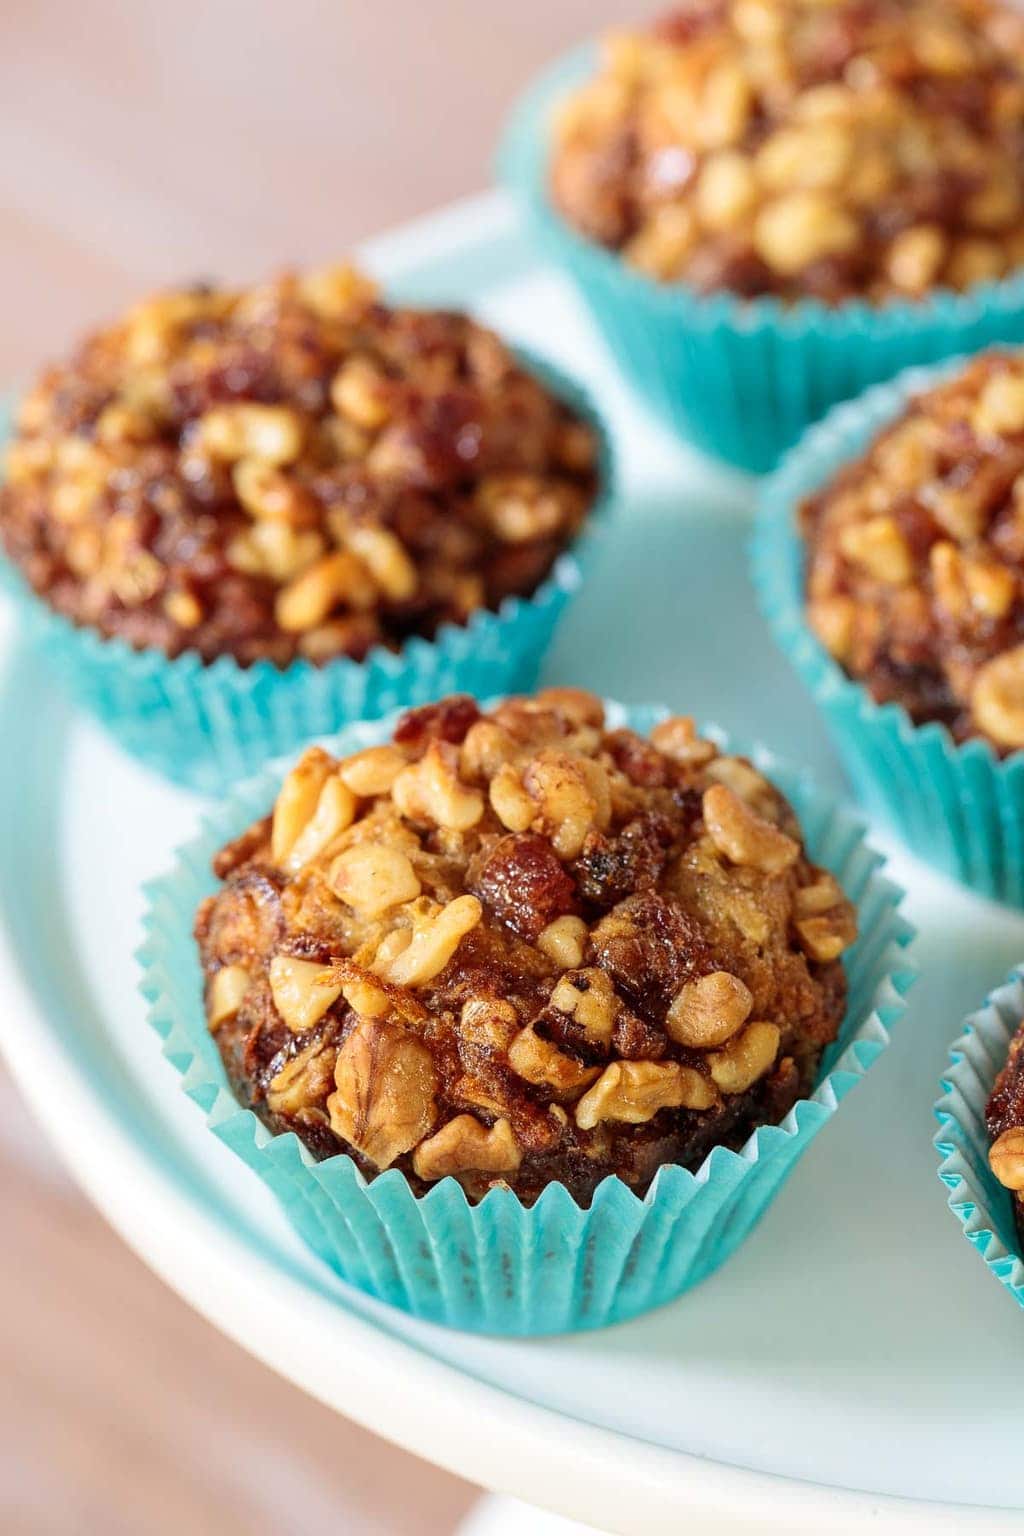 Vertical photo of Walnut Date Banana Muffins with turquoise wrappers on a white cake stand.